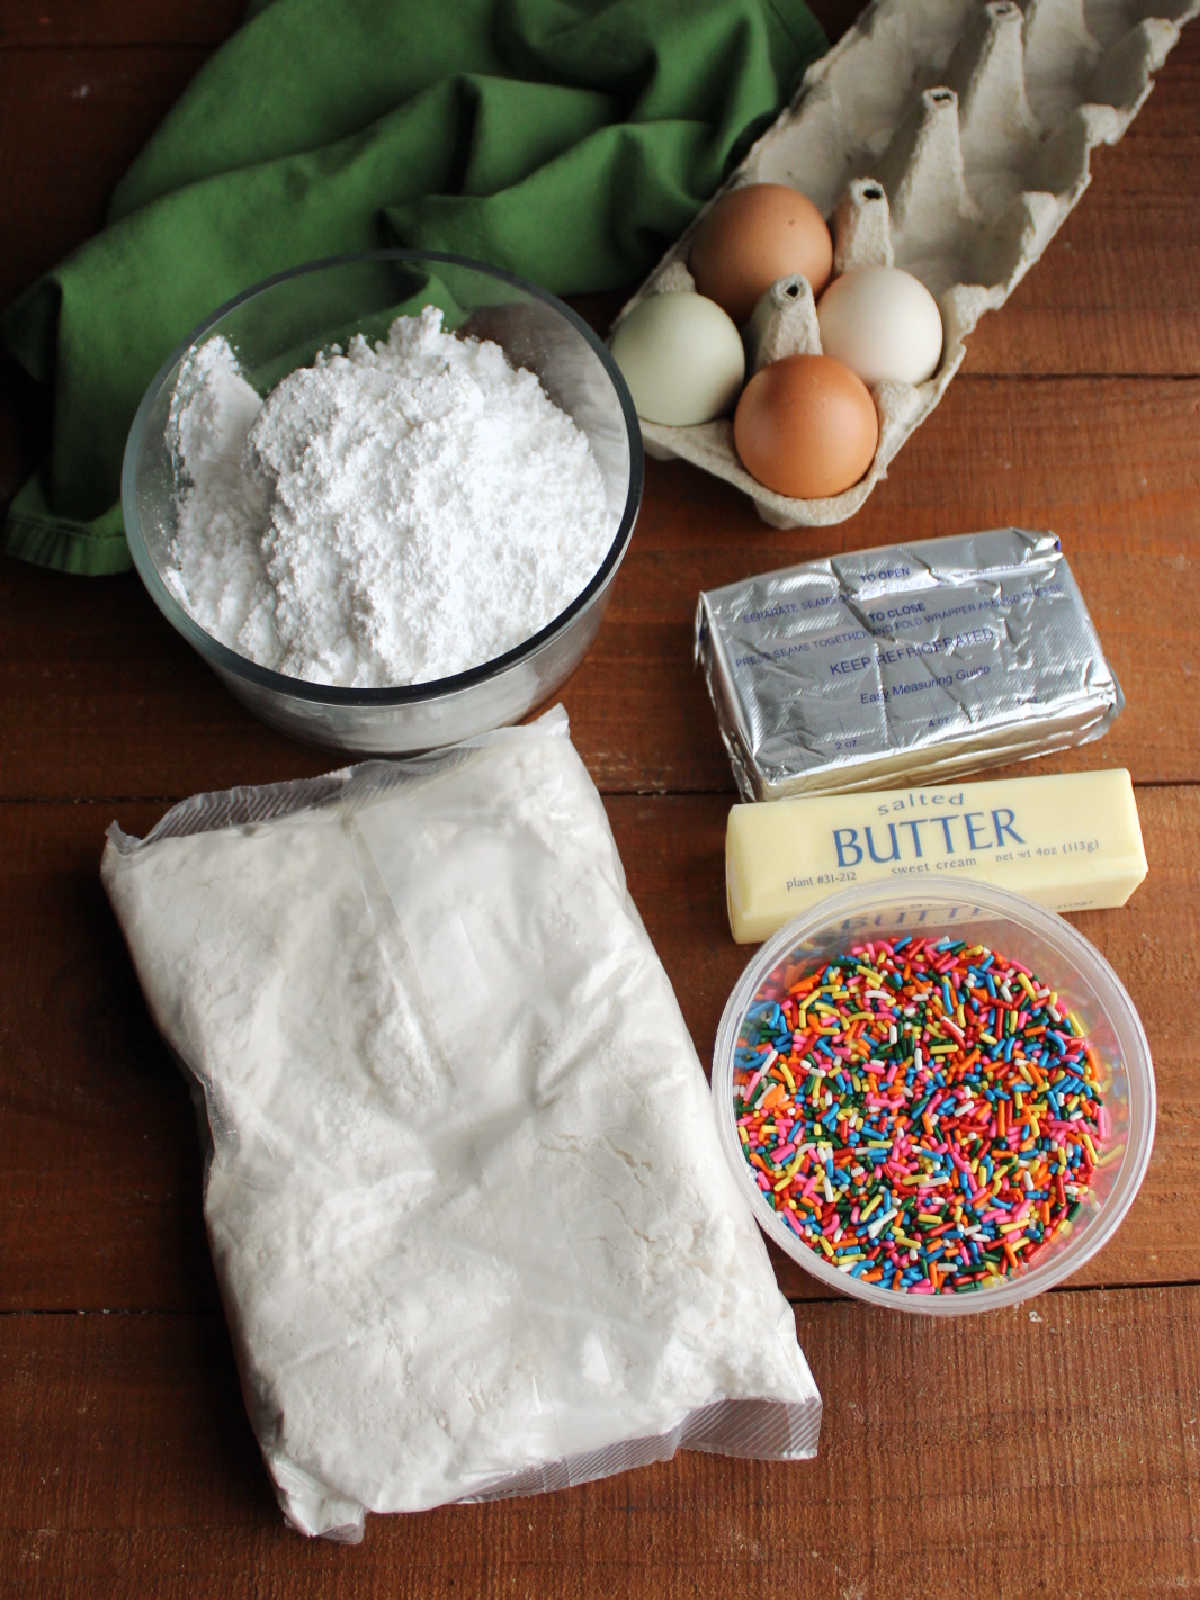 Ingredients including cake mix, sprinkles, butter, cream cheese, powdered sugar, and eggs.